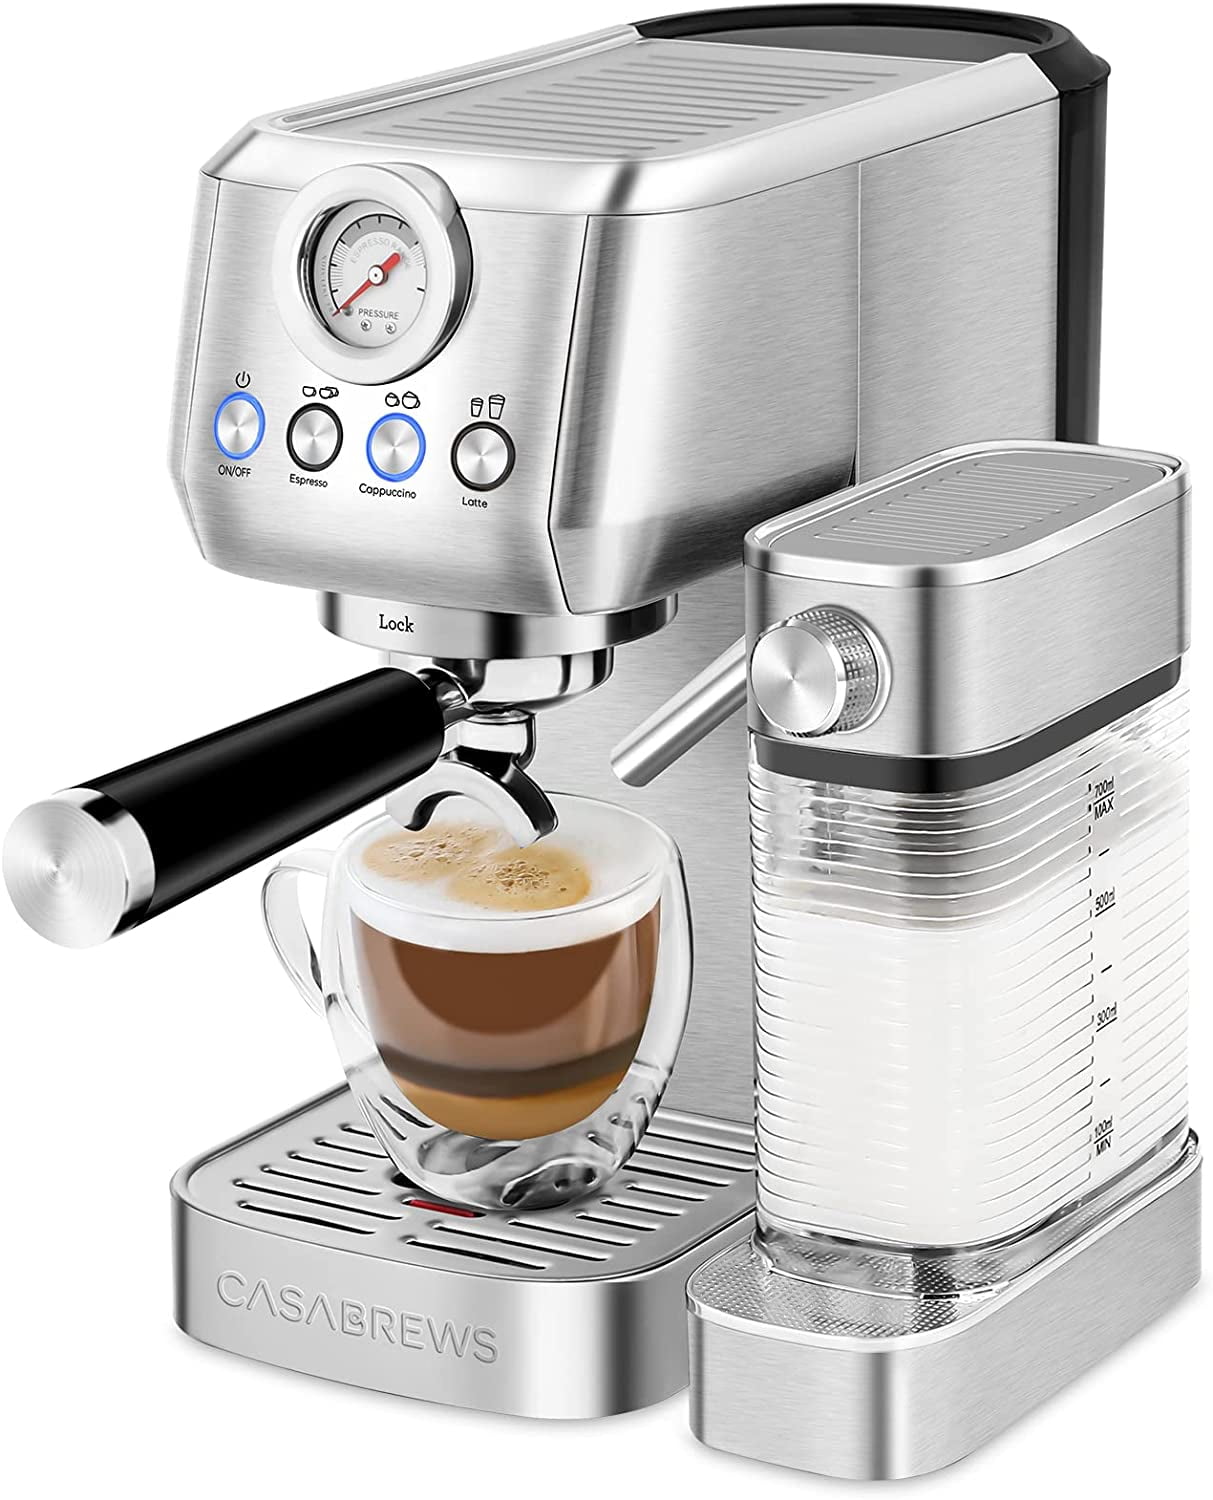 Casabrews 20 Bar Espresso Machine, Professional Espresso Maker with Milk  Frother, Stainless Steel New, Silver